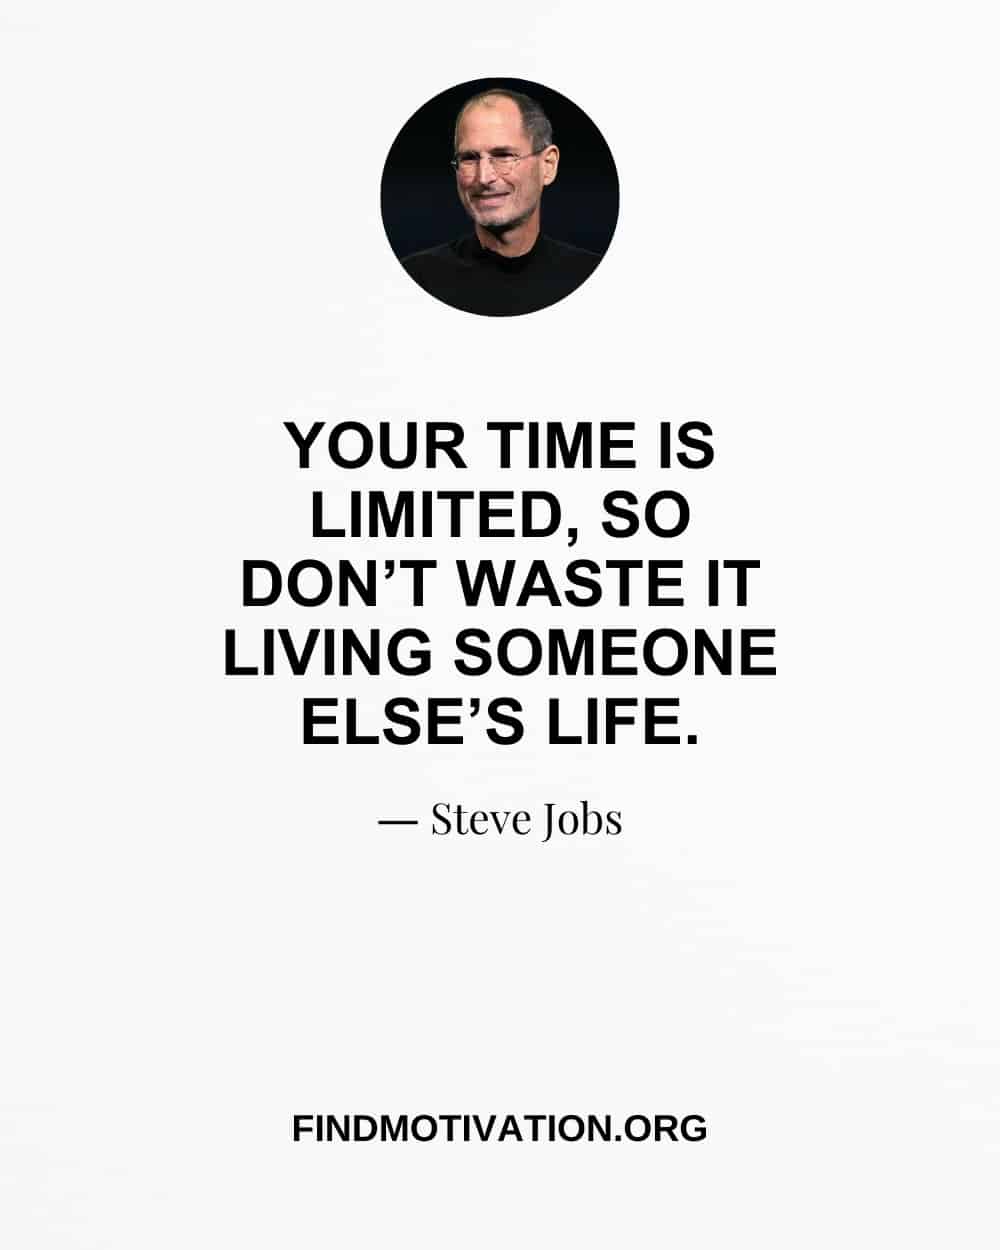 Steve Jobs Quotes To Succeed In Your Life